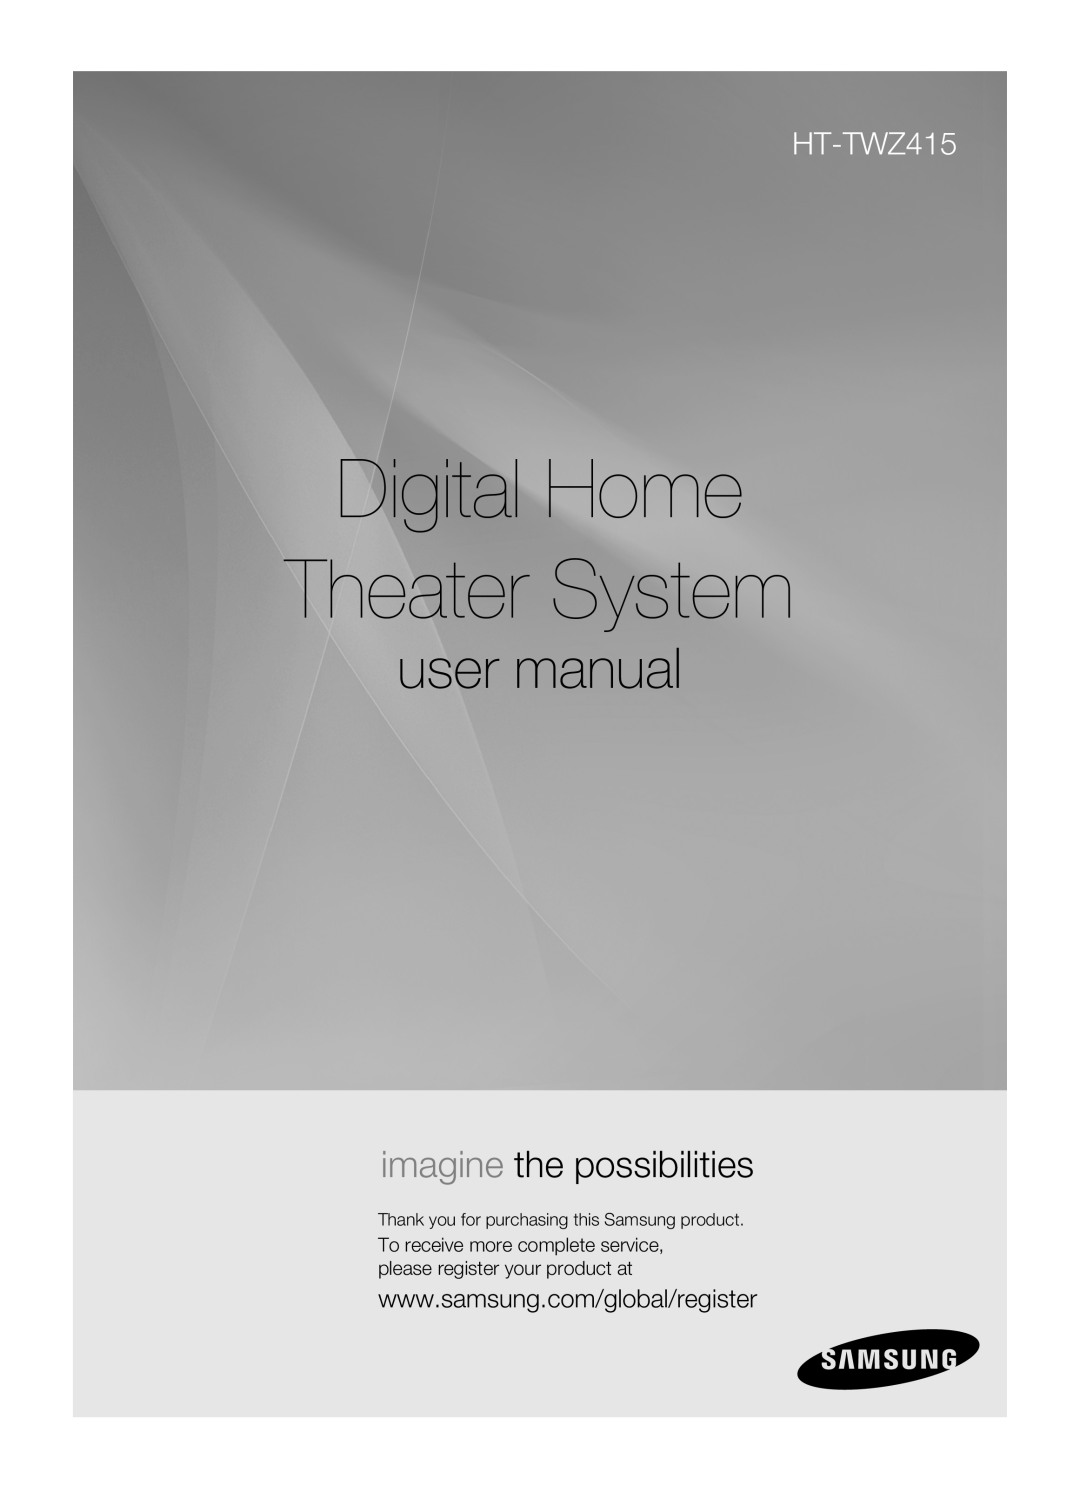 Samsung HT-TWZ415 user manual Digital Home Theater System, imagine the possibilities 